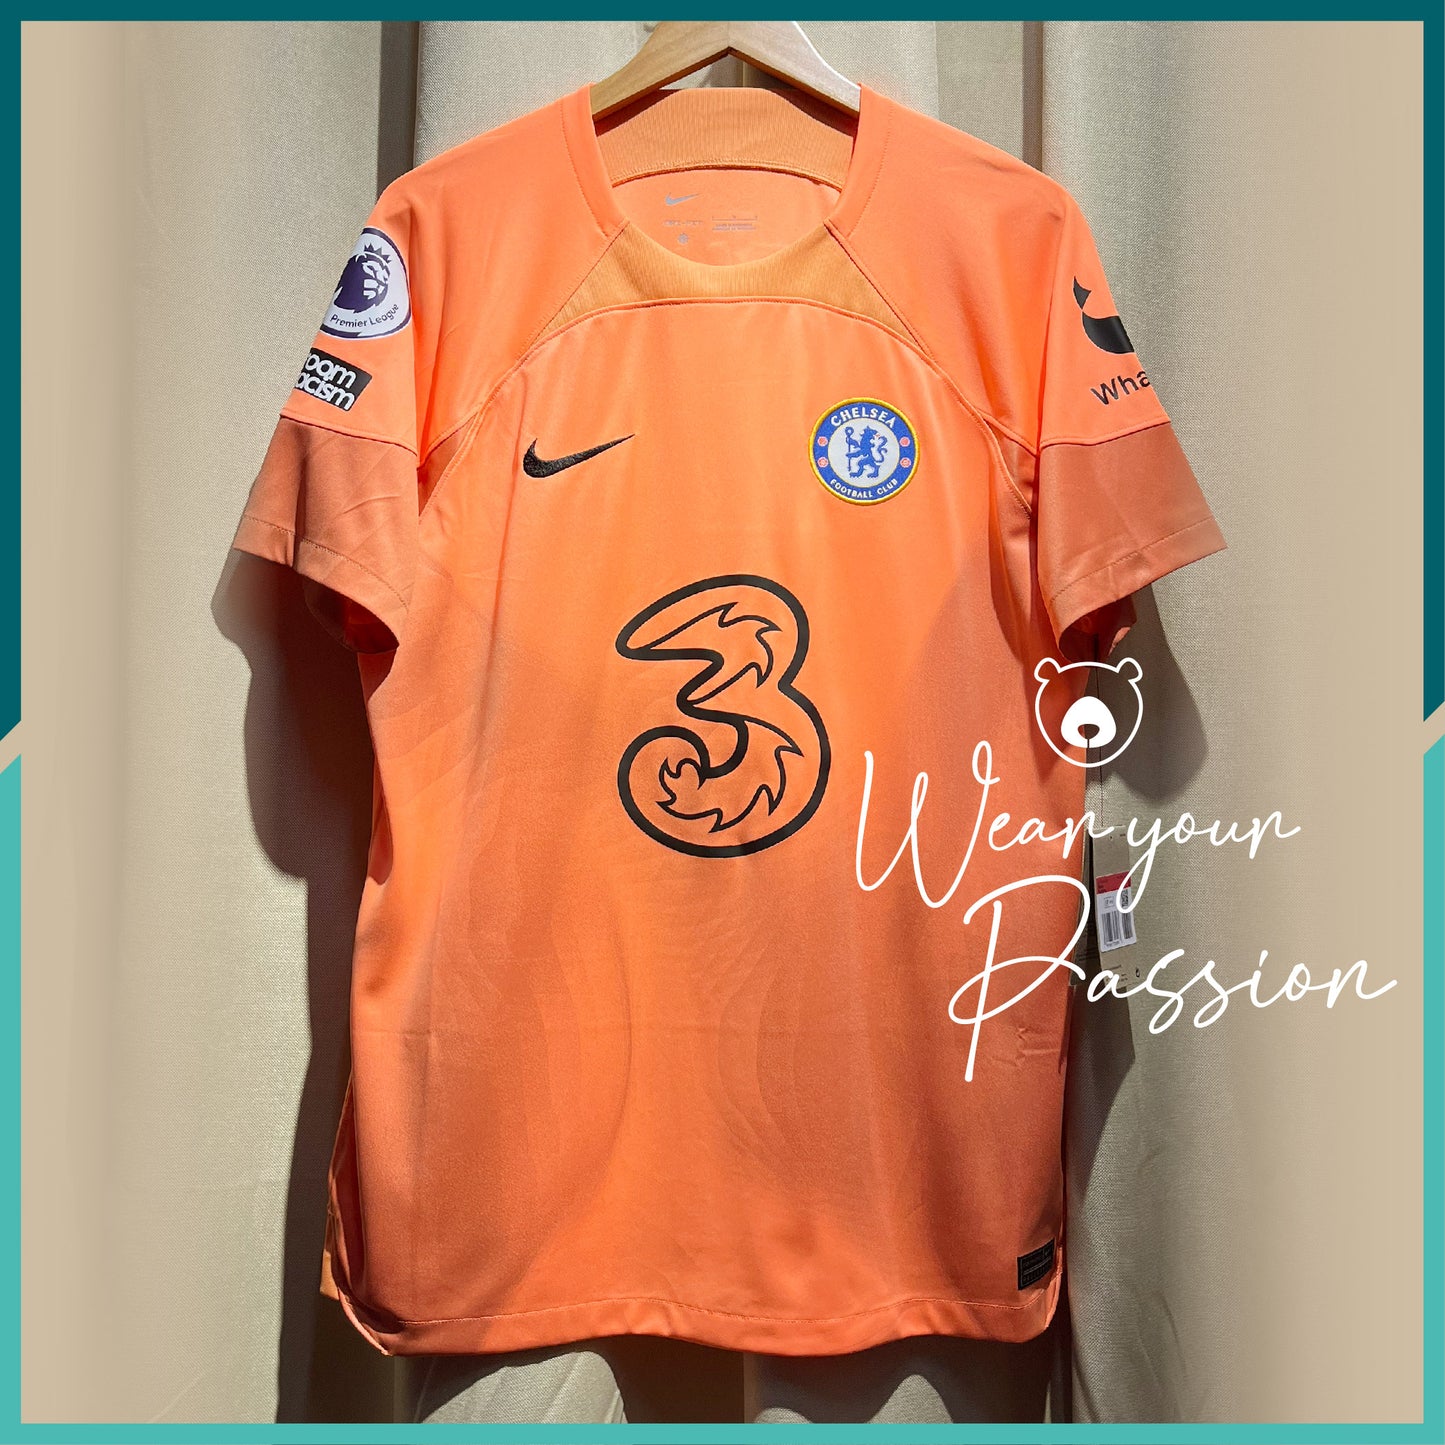 [Nameset & Patches Included] 2022-23 Chelsea GK Jersey